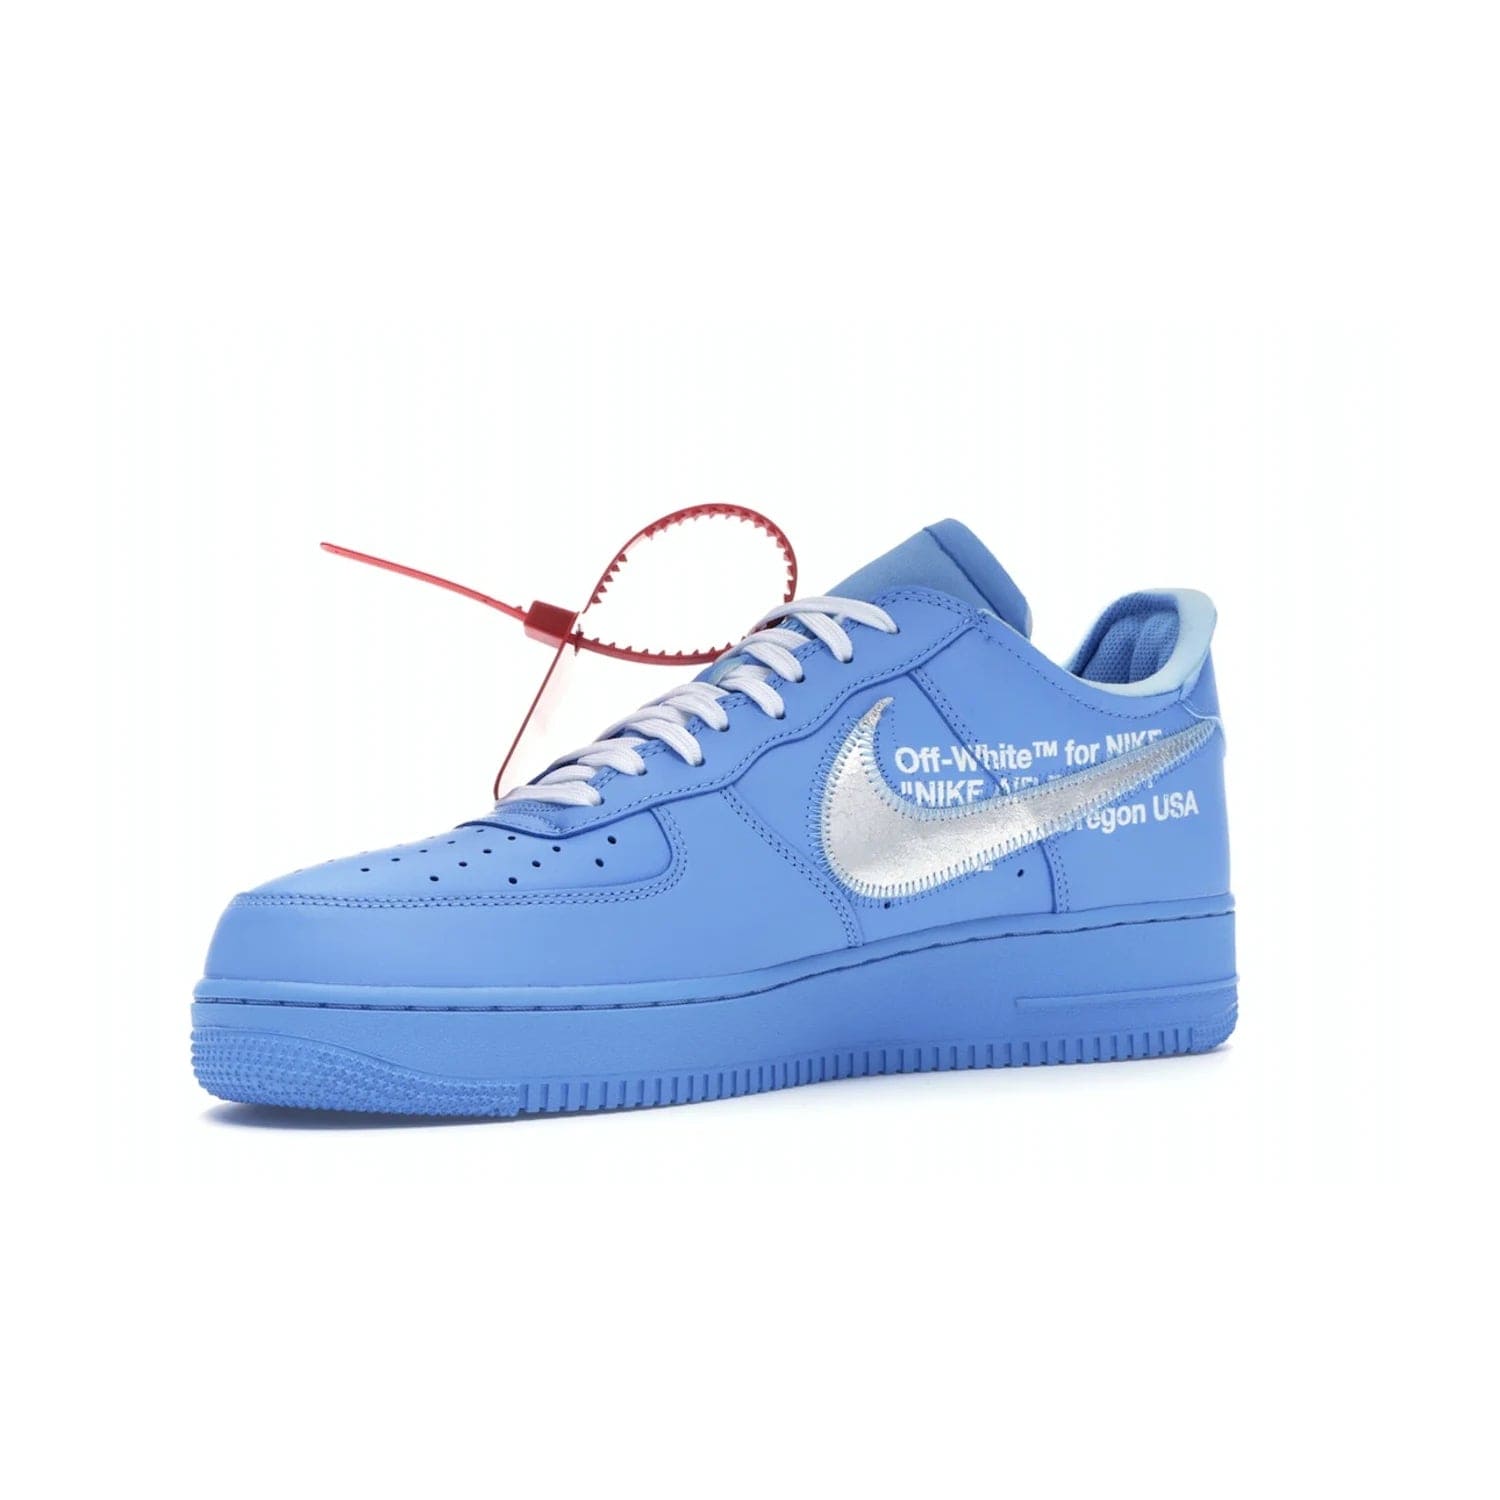 Nike Air Force 1 Low Off-White MCA University Blue - Image 16 - Only at www.BallersClubKickz.com - Virgil Abloh's Air Force 1 Low Off-White MCA University Blue: Features University Blue leather and midsole, reflective silver Nike Swoosh, red zip tie, white laces, and iconic Off-White™ branding. A must-have for any Virgil Abloh enthusiast.